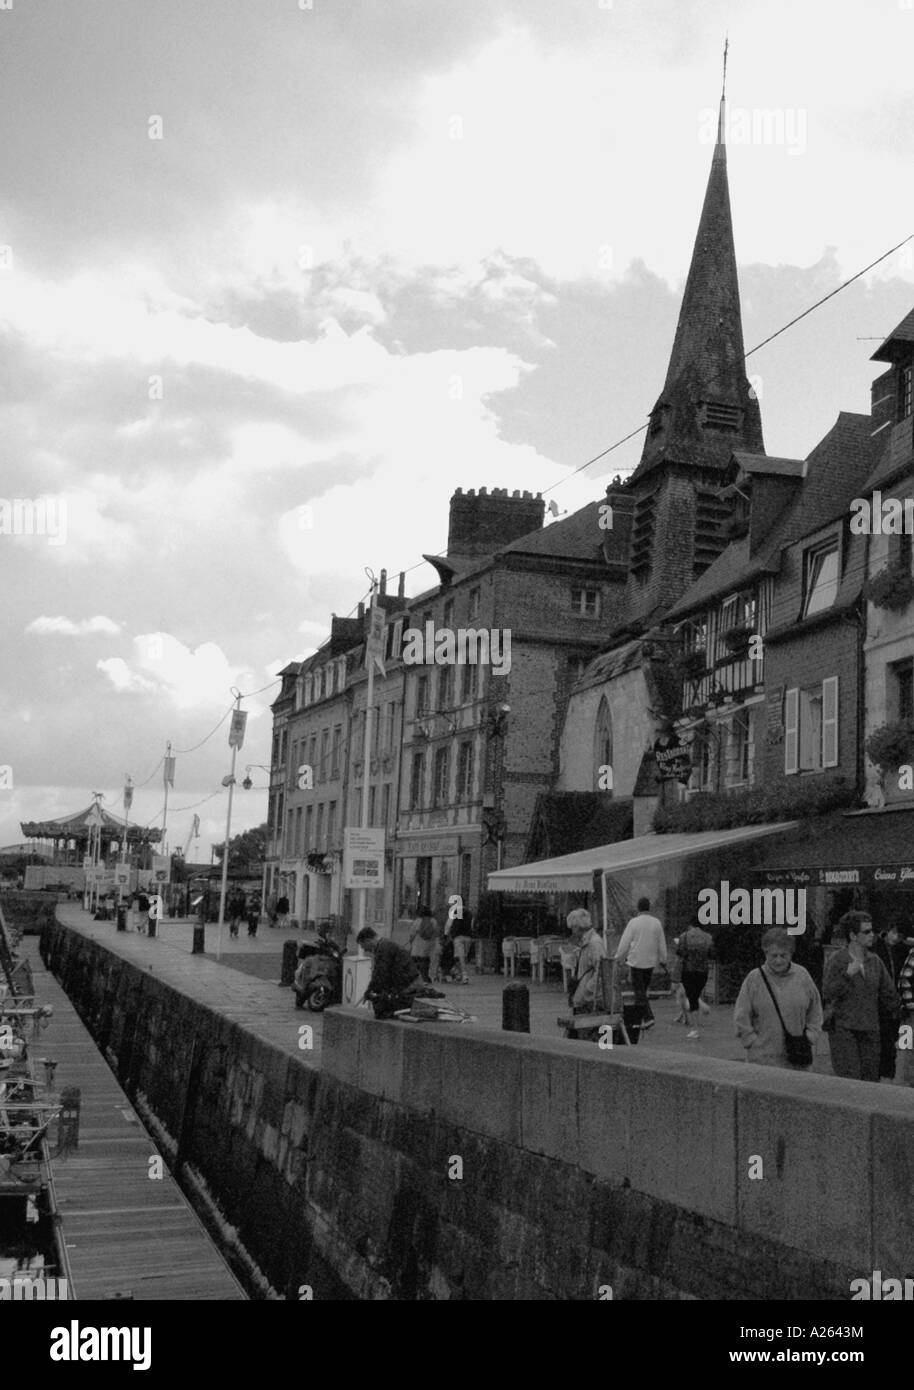 Honfleur france tower Black and White Stock Photos & Images - Alamy